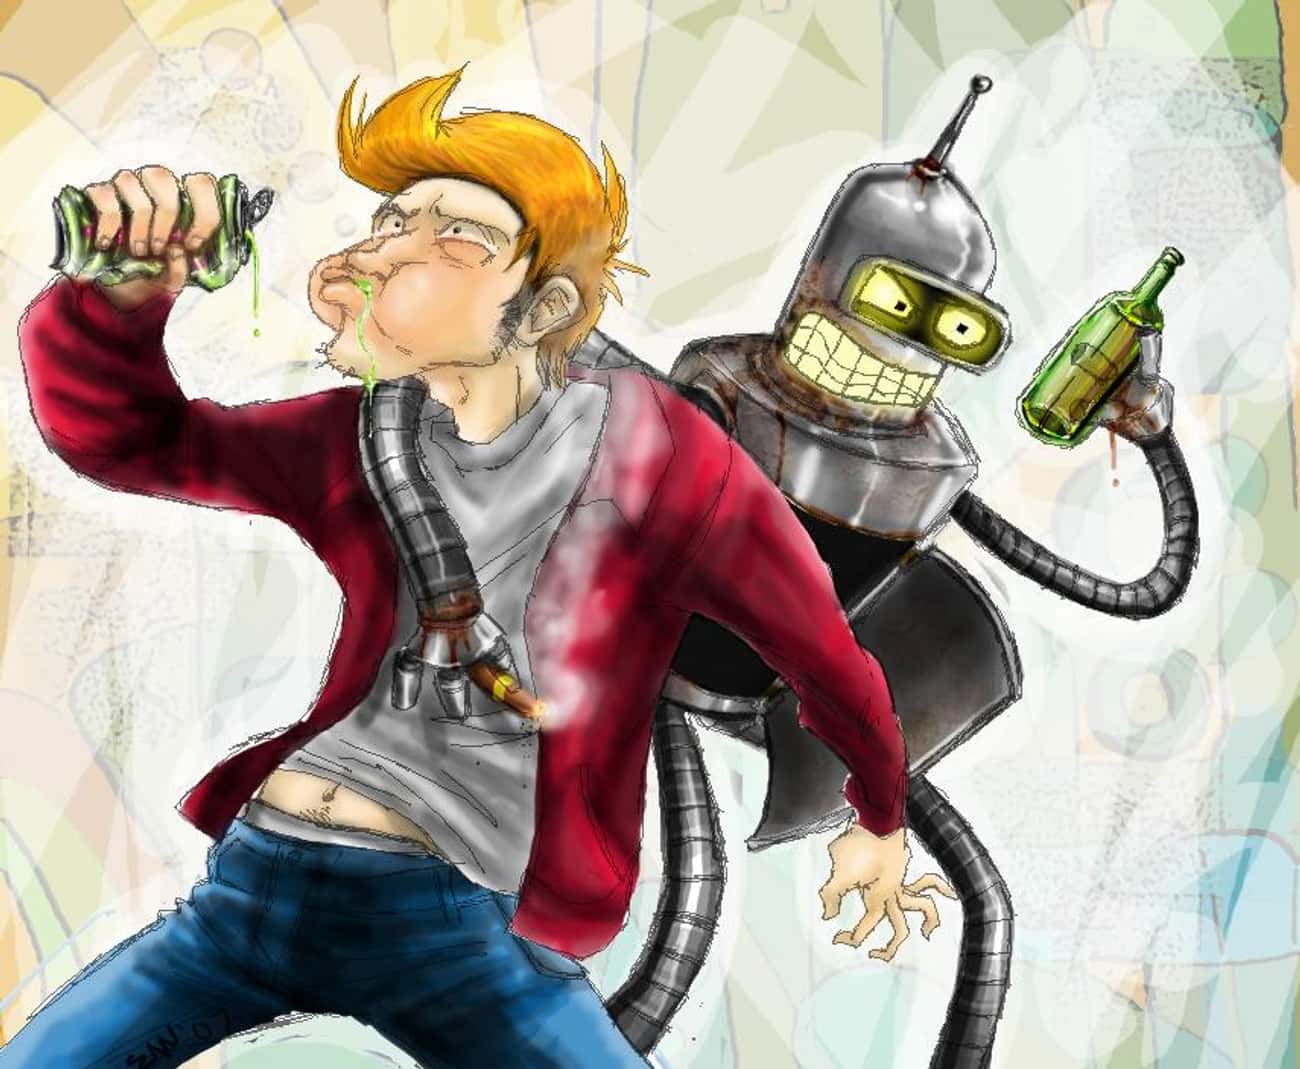 Fry And Bender